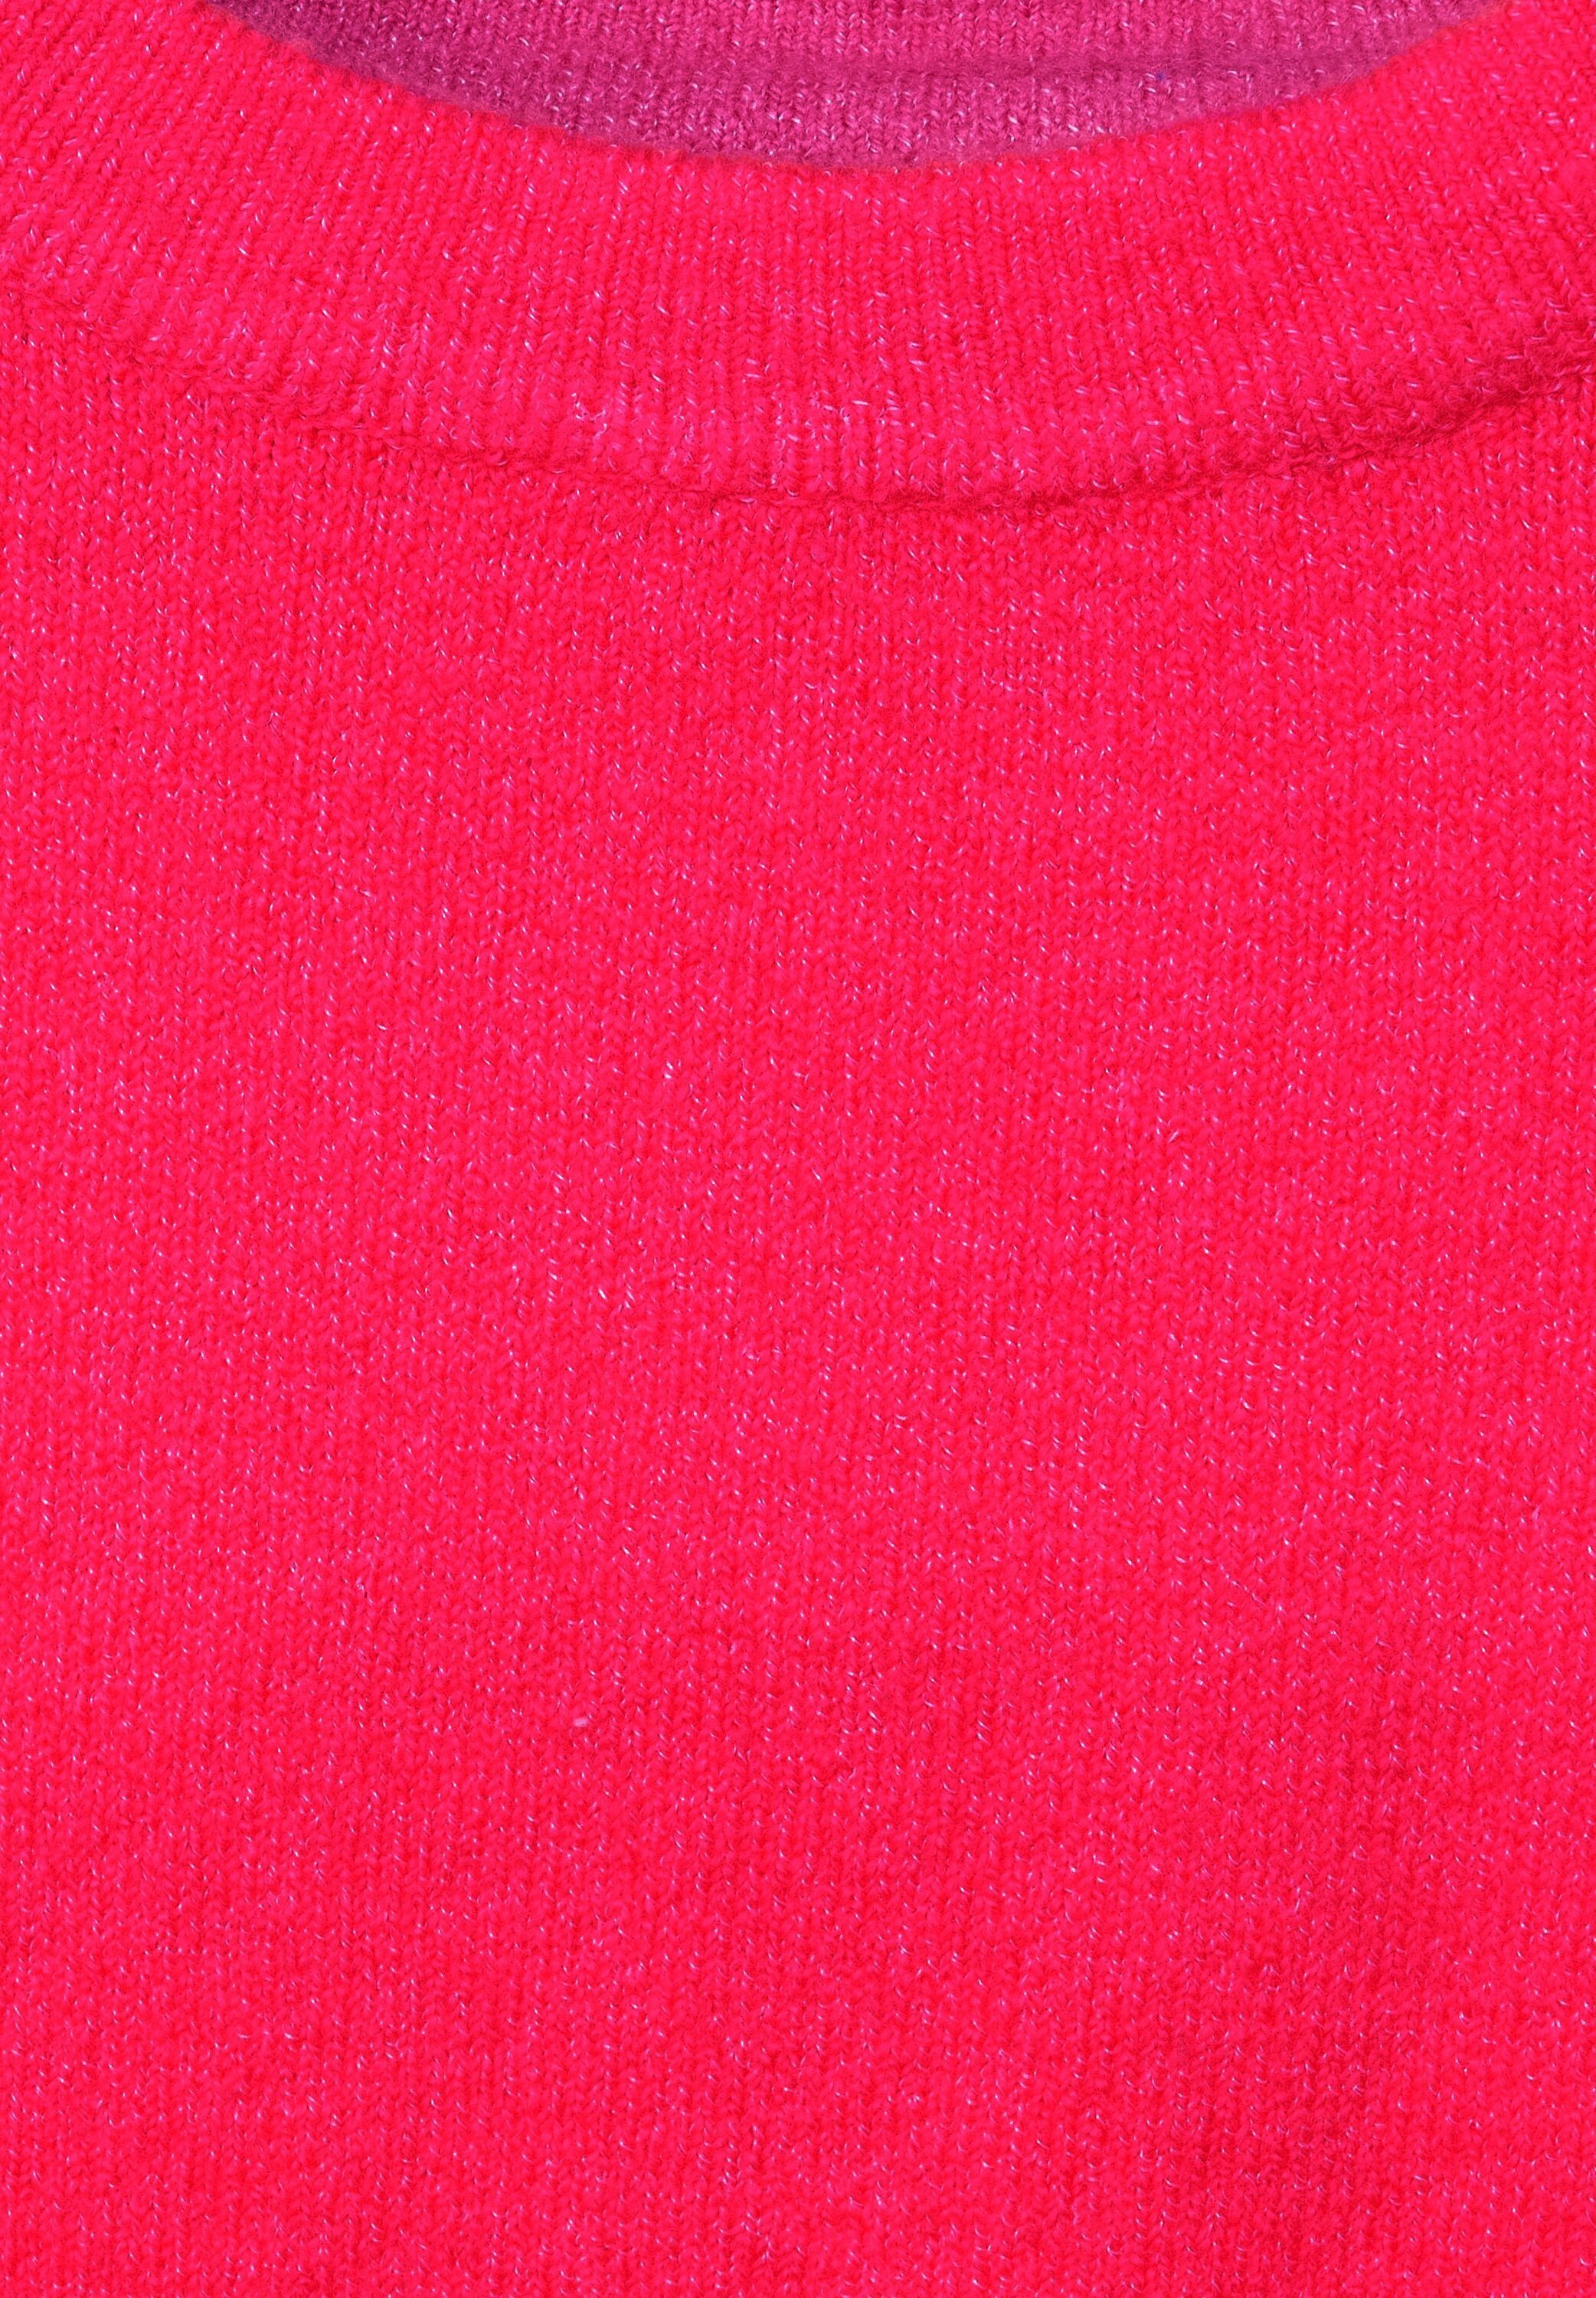 showy mit Strickpullover ONE Pullover coral STREET Farbdetails